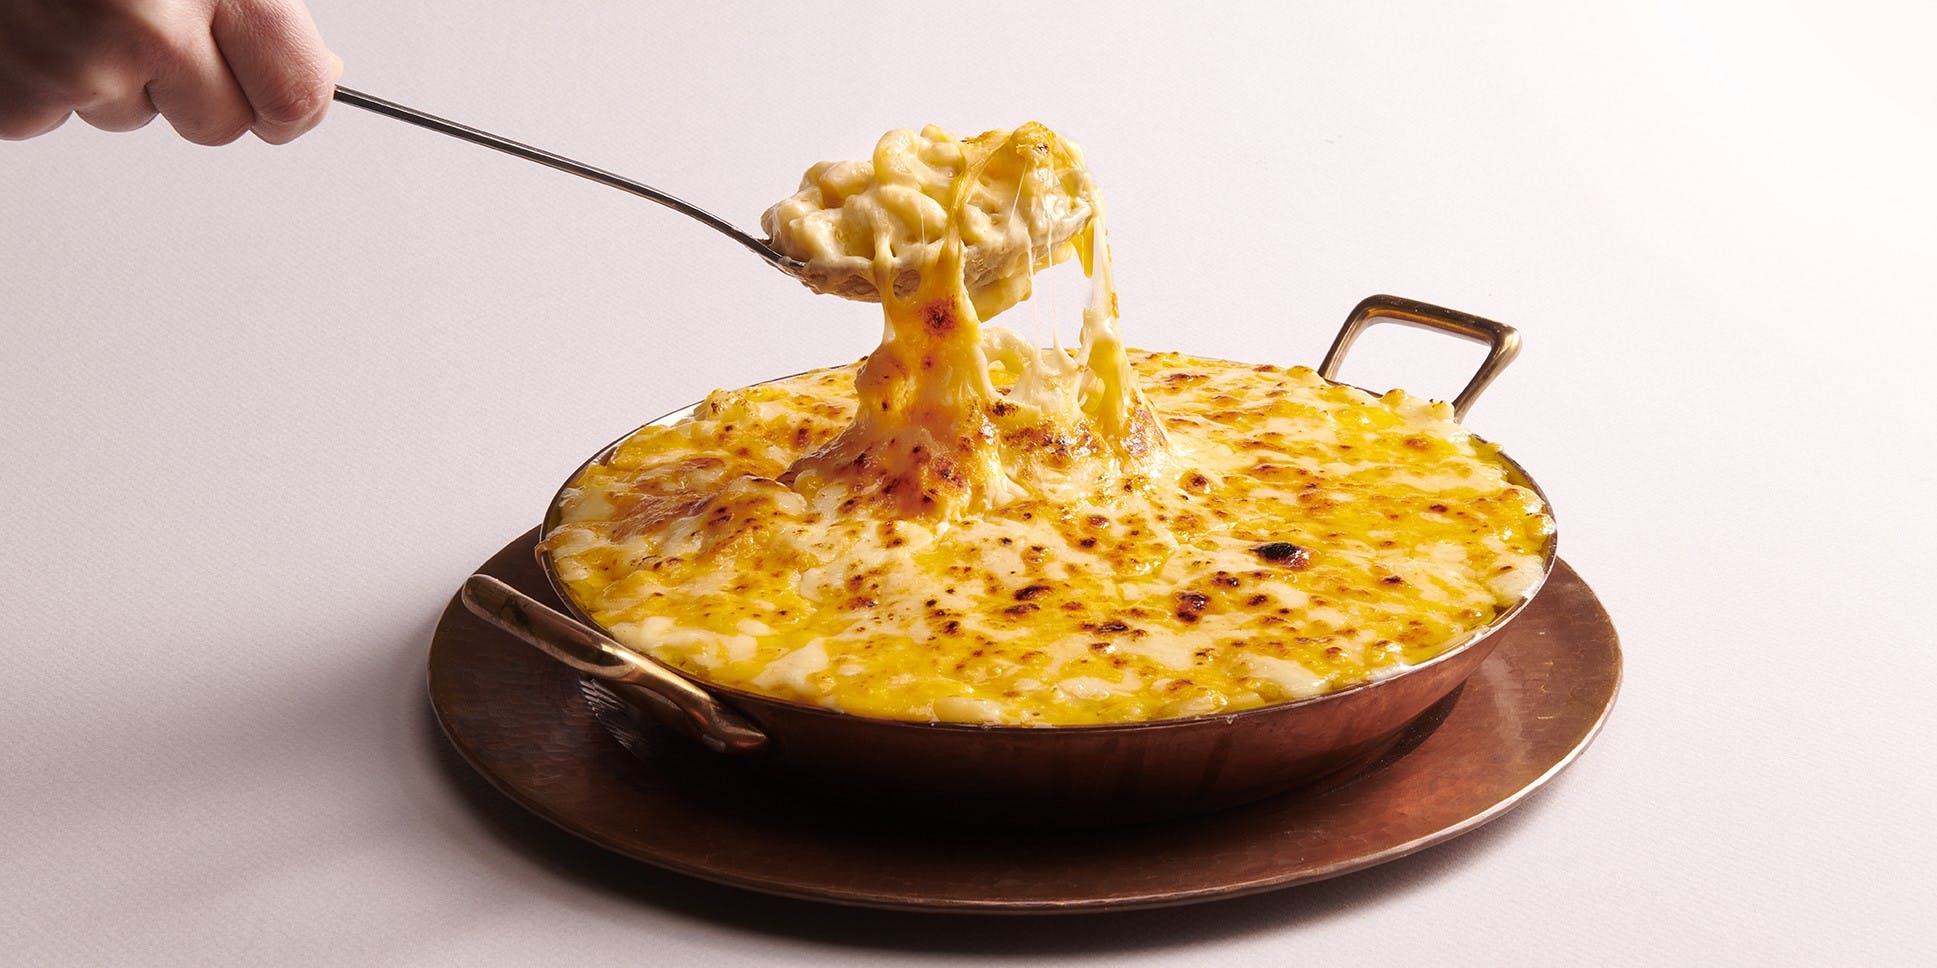 Perfectly baked mac and cheese